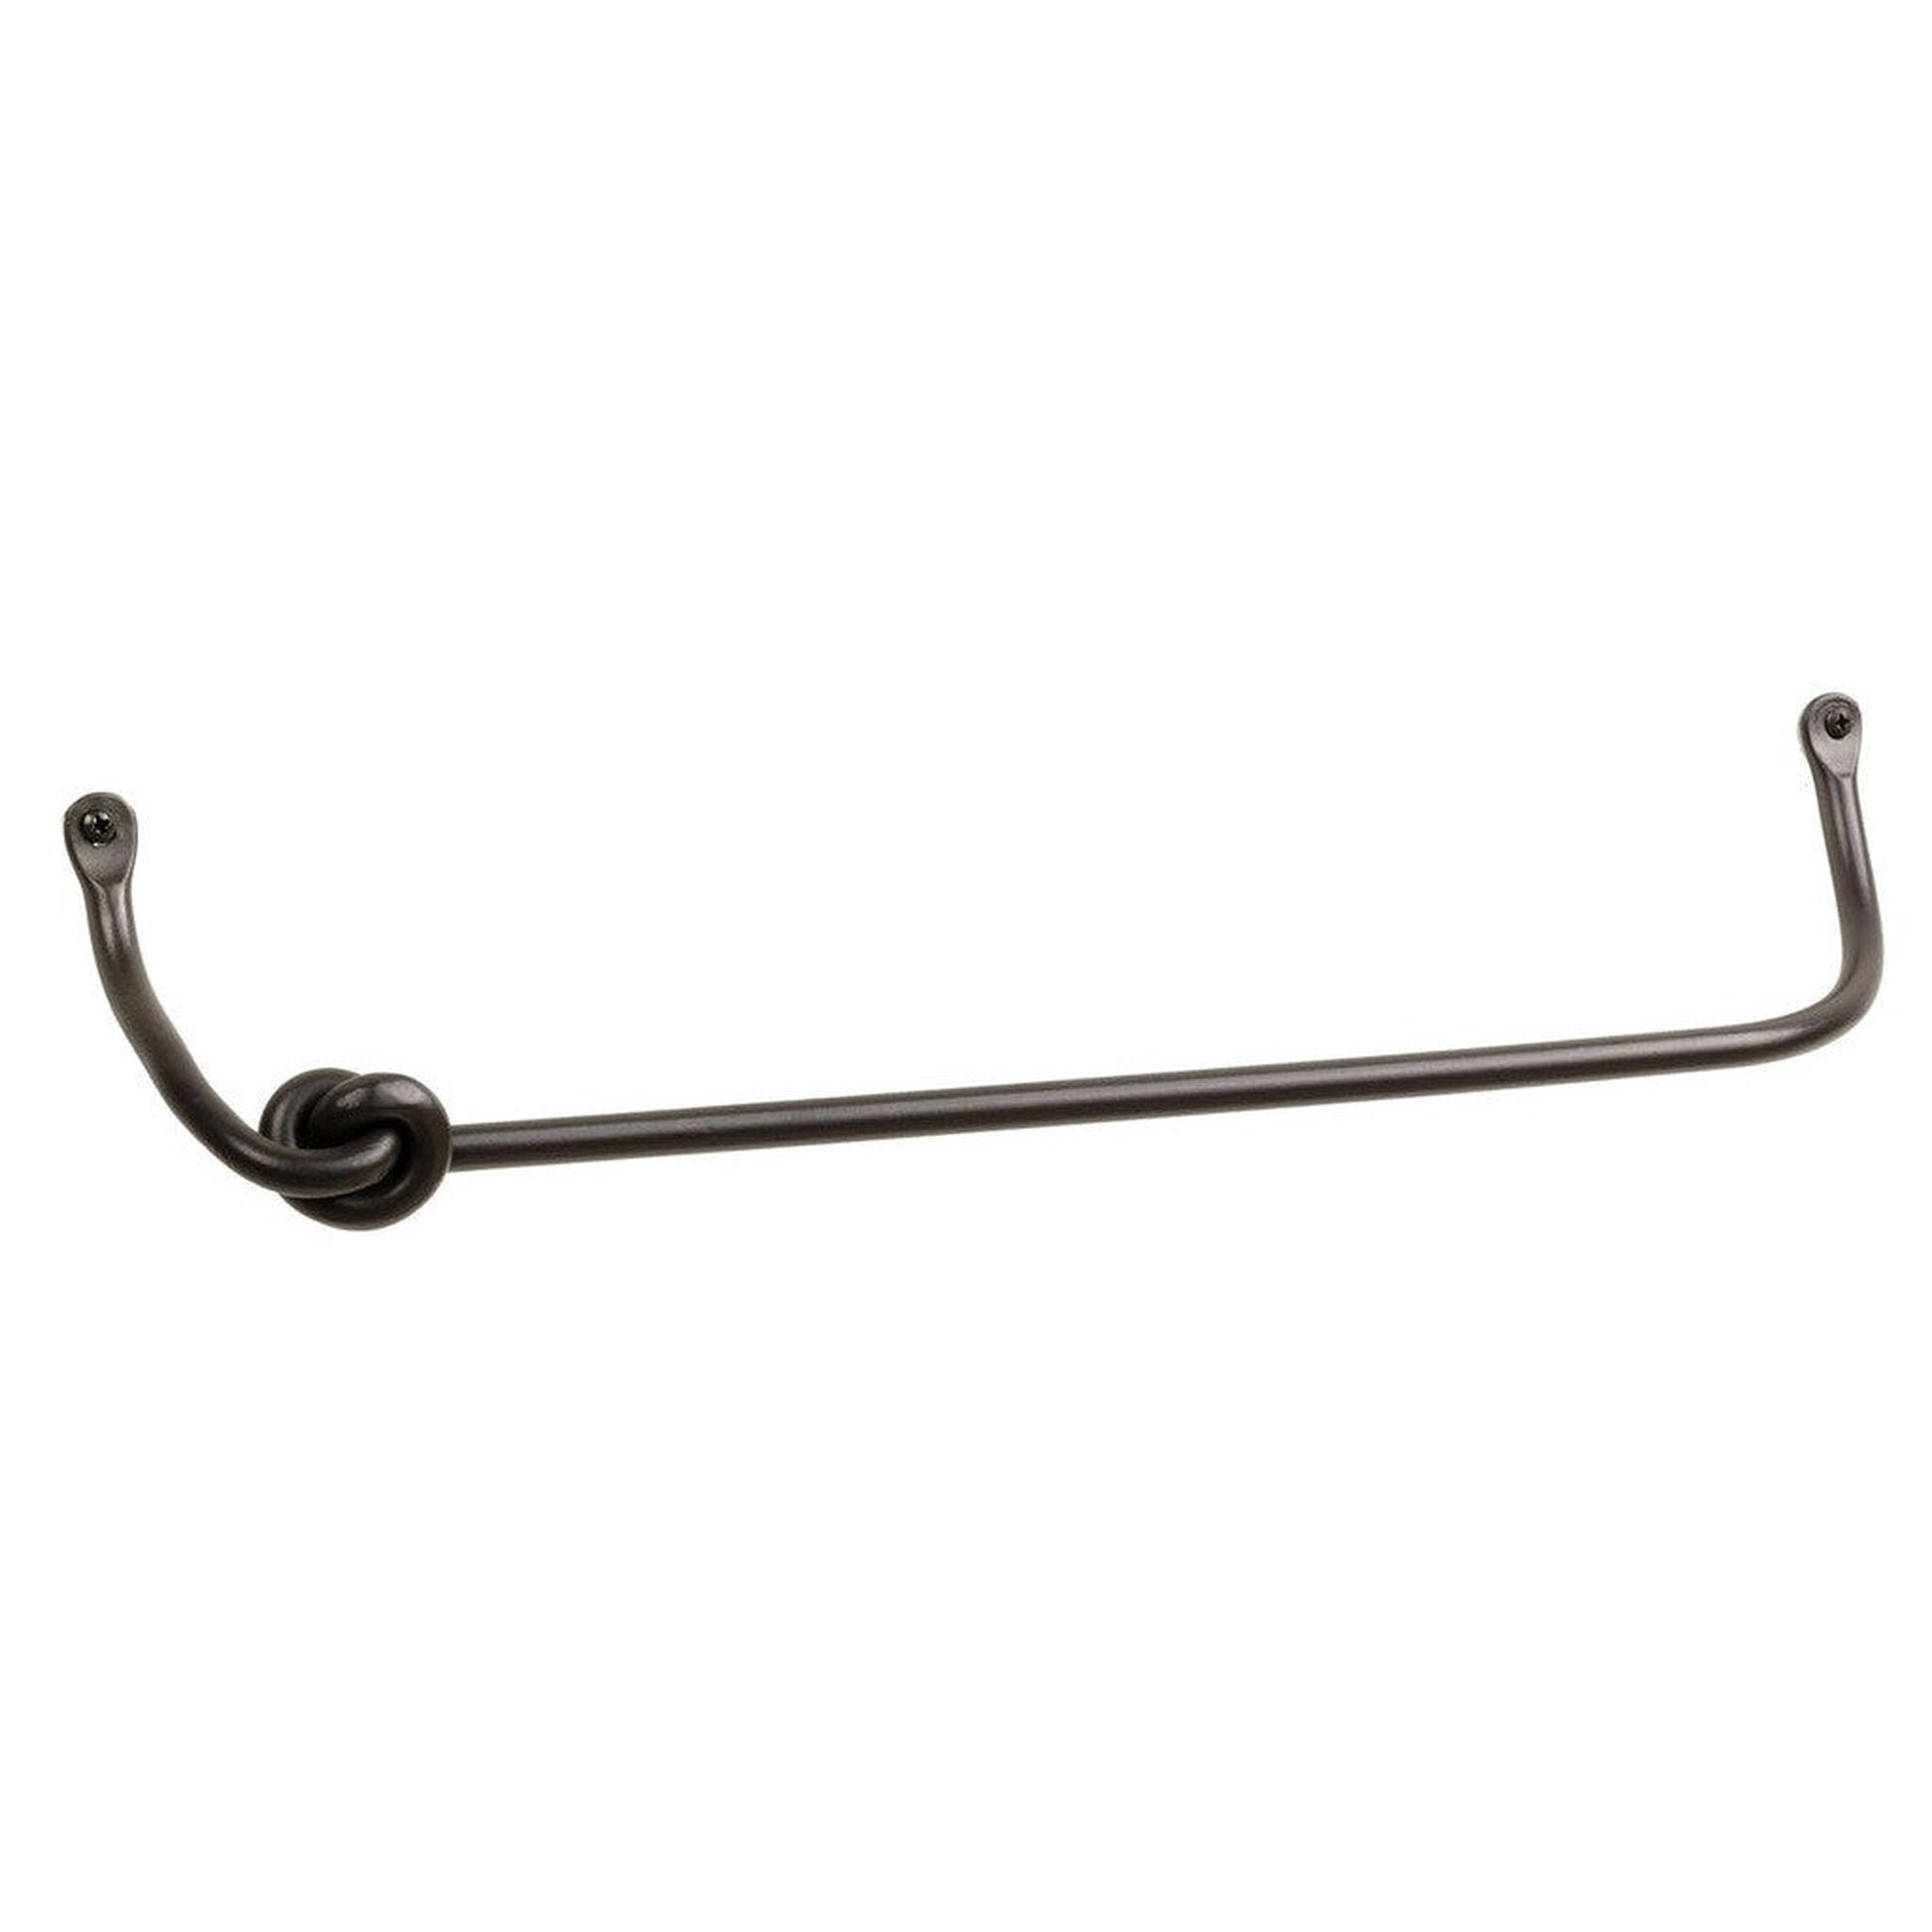 Stone County Ironworks Knot 16" Hand Rubbed Ivory Iron Towel Bar